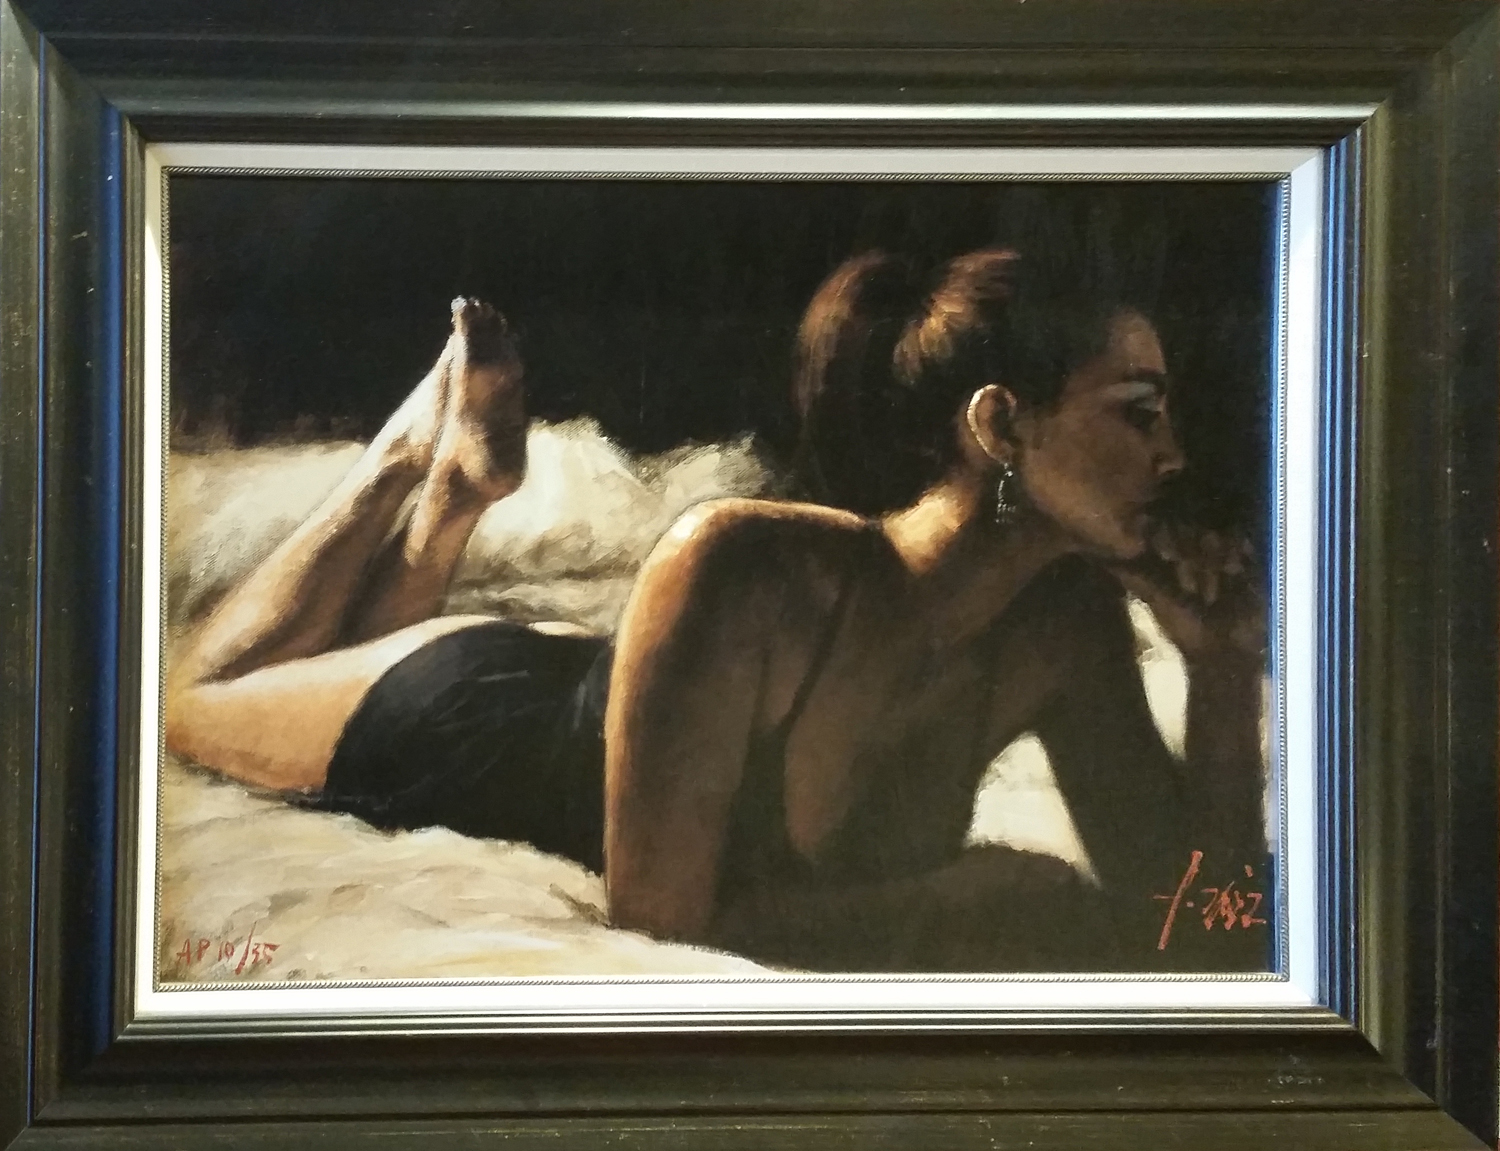 Fabian Perez Paola in Bed